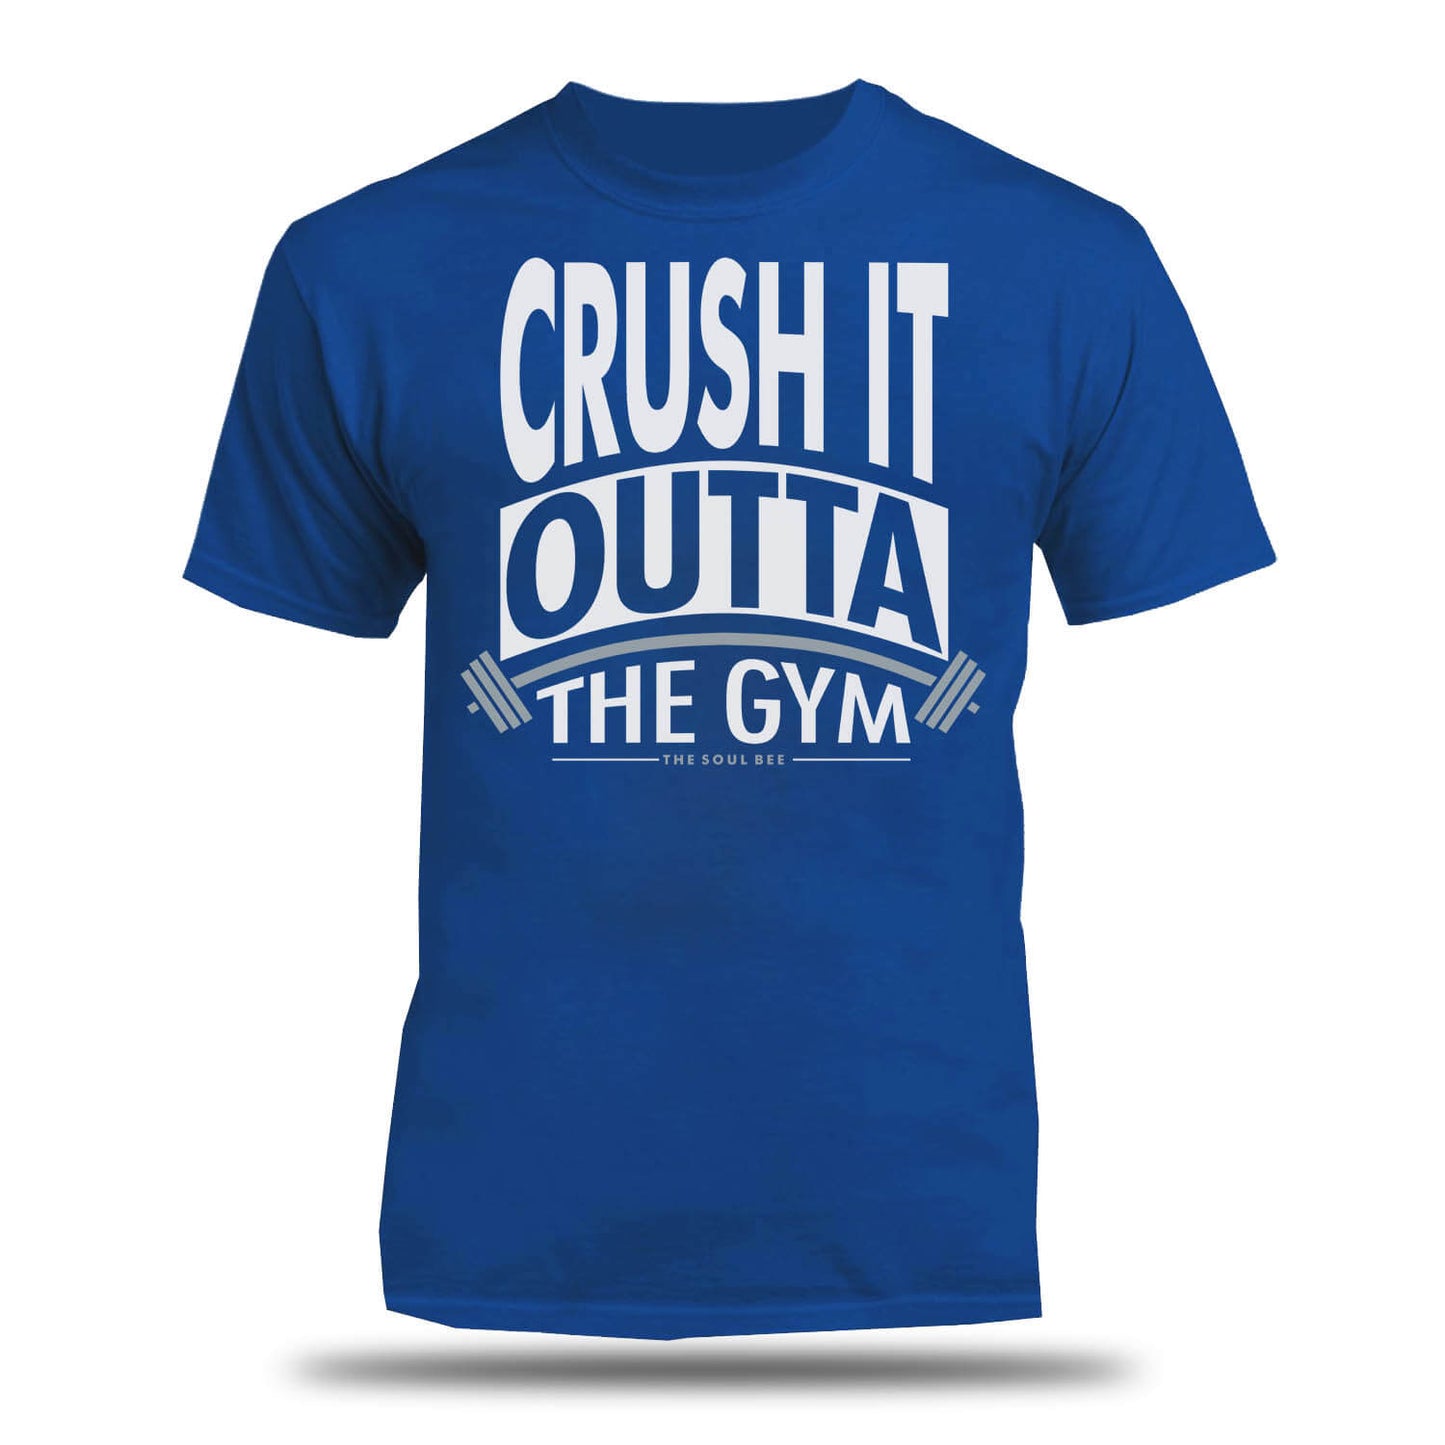 Crush It Outta The Gym